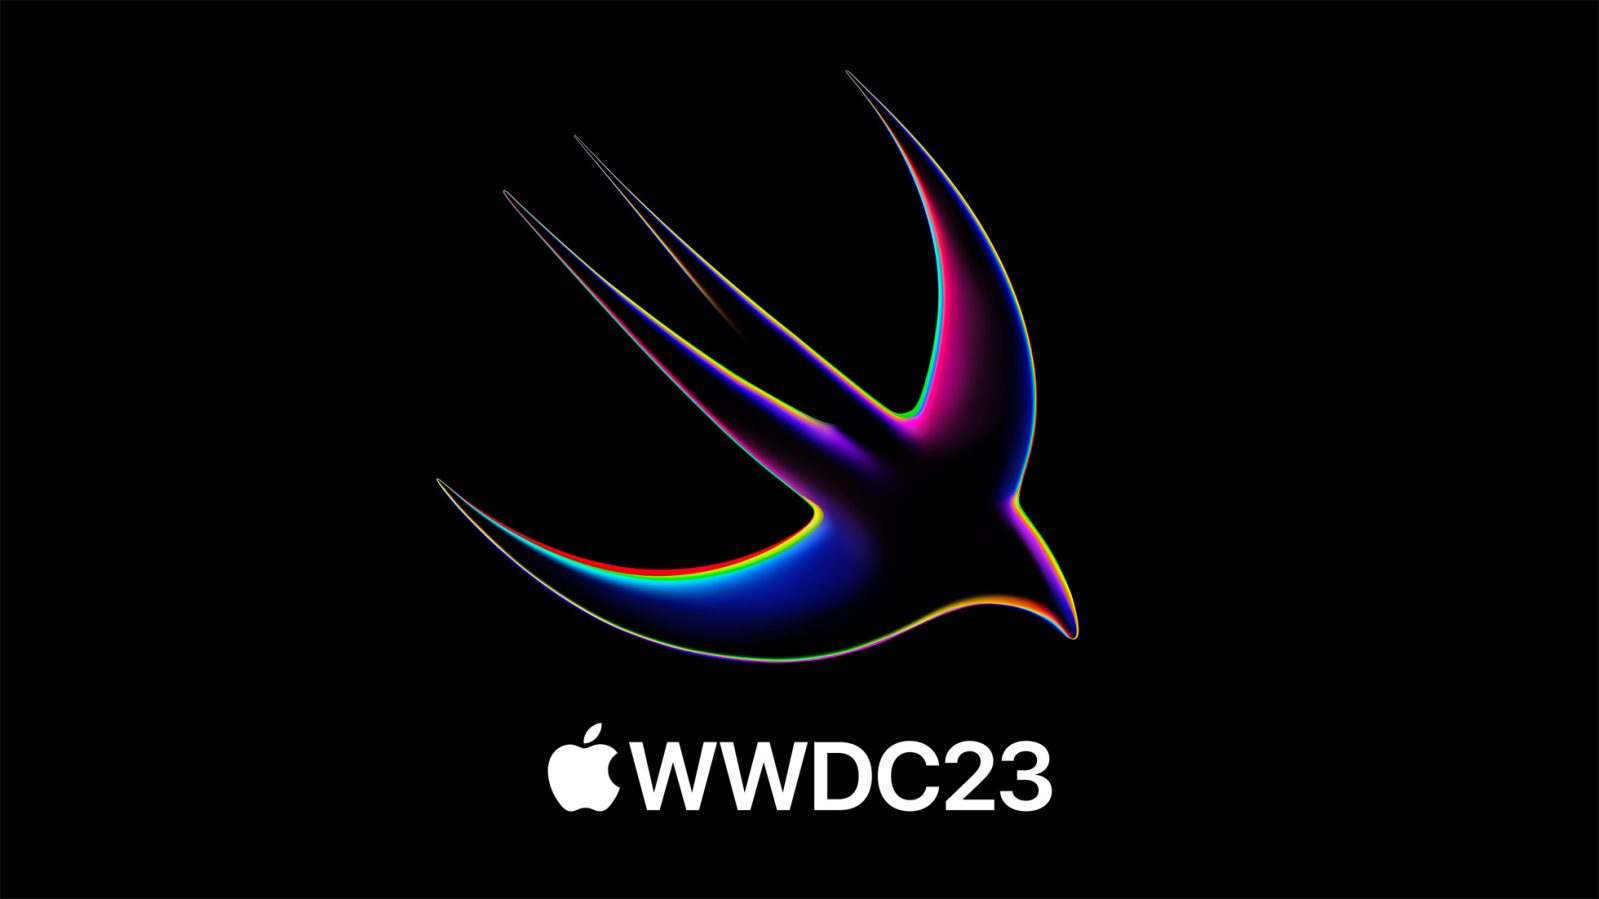 Apple teases WWDC 2023, confirms keynote for June 5 at 10 a.m.